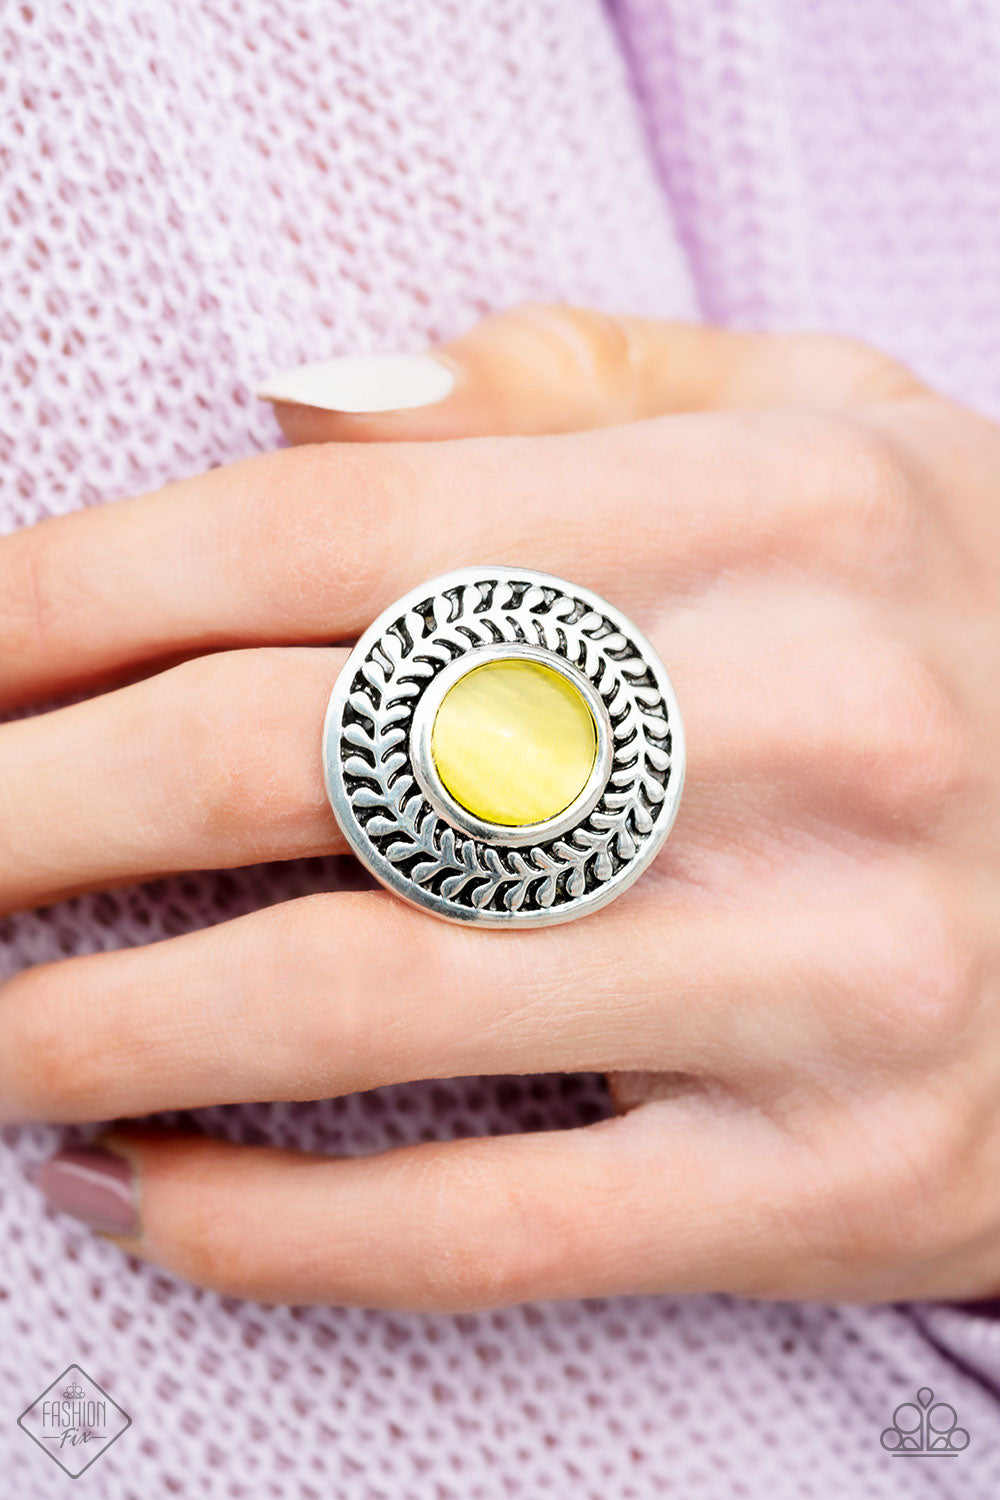 Paparazzi Garden Garland - Yellow Moonstone - Silver Ring - Fashion Fix / Trend Blend April 2019 - $5 Jewelry With Ashley Swint